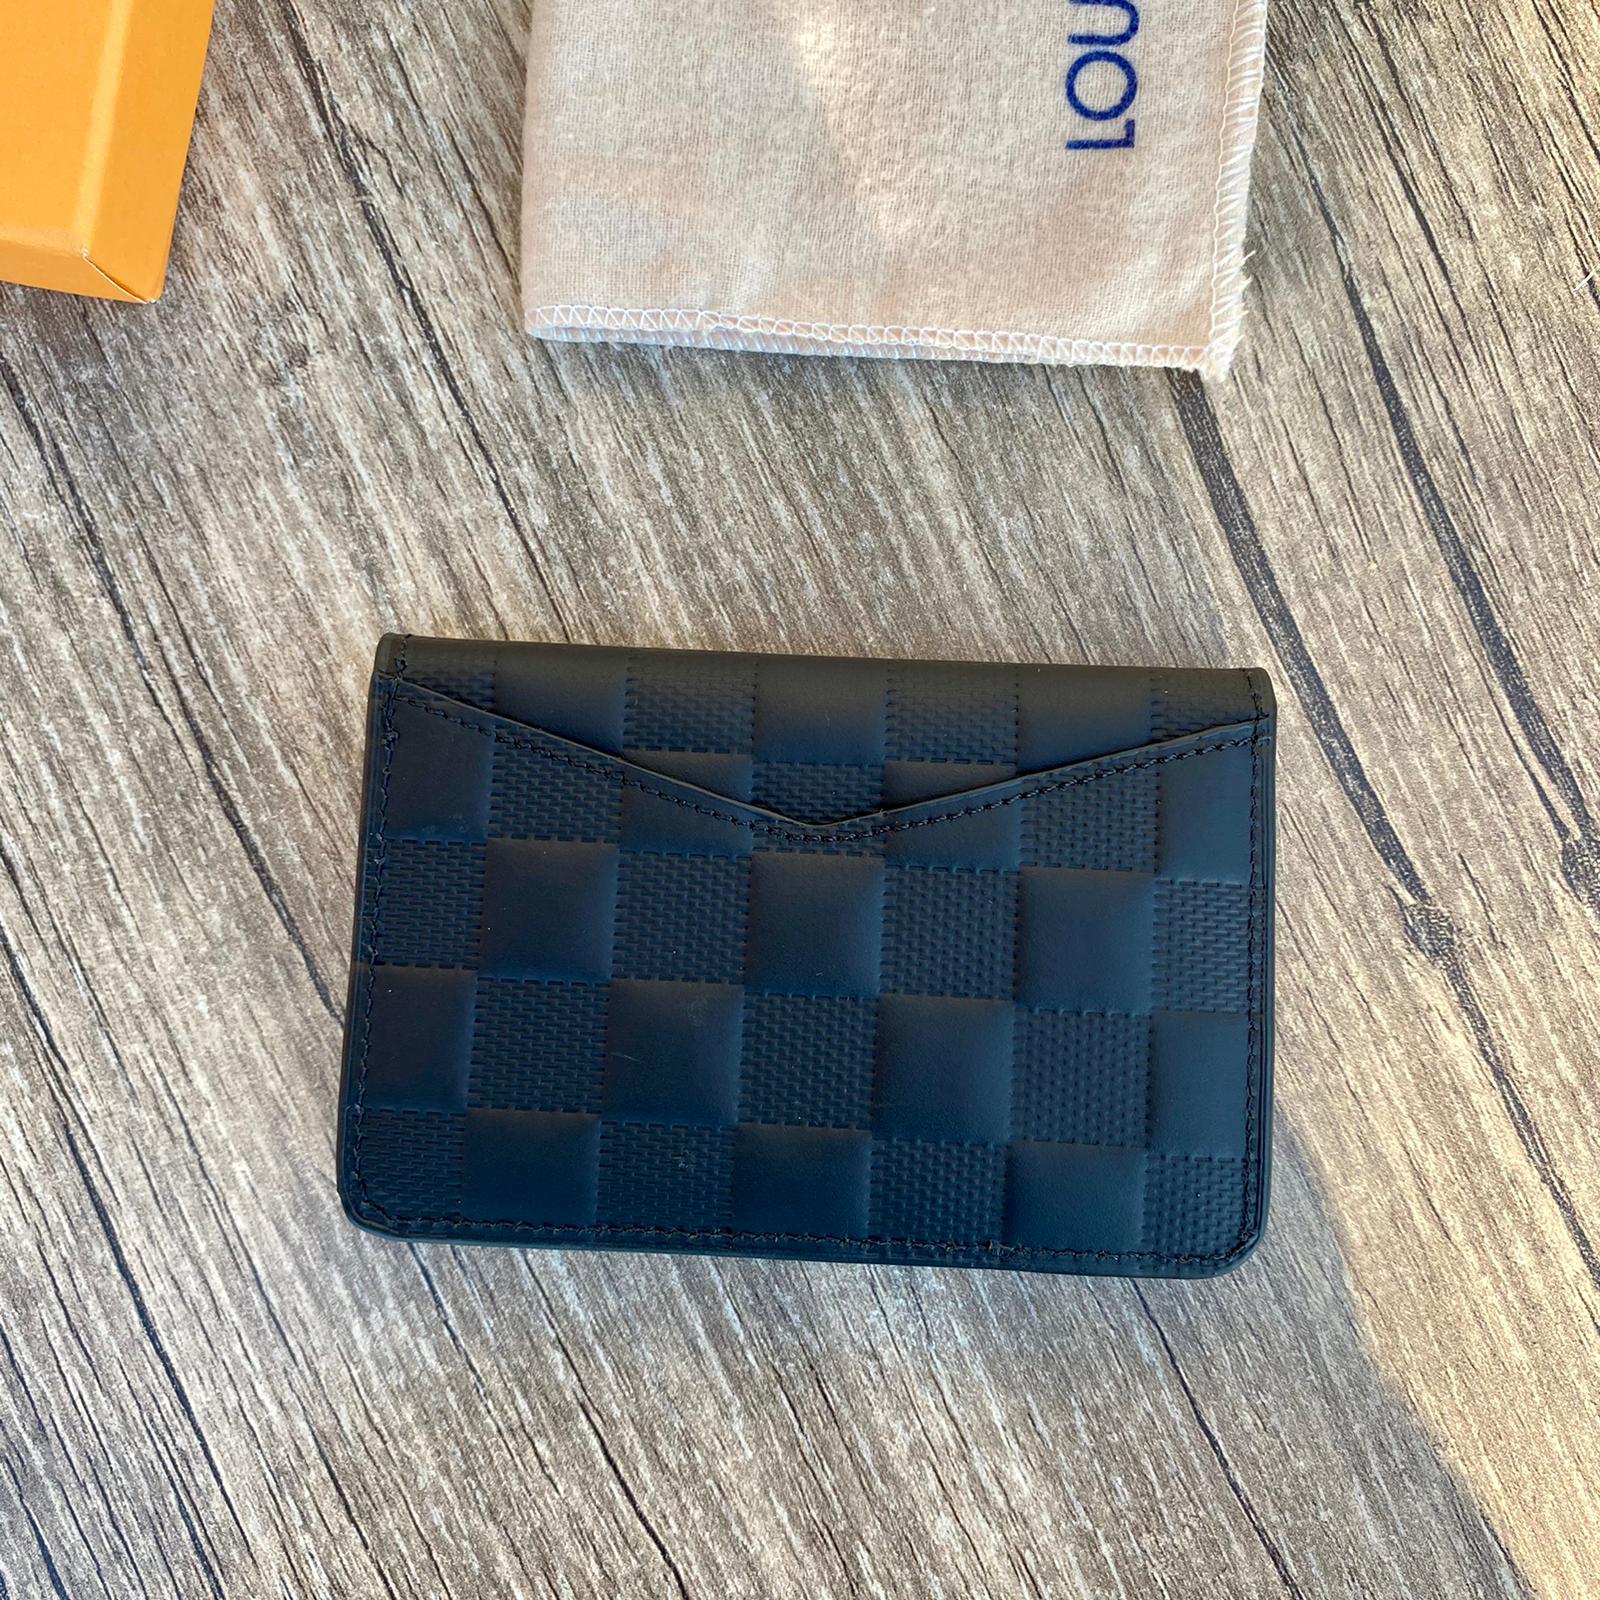 Louis Vuitton Black Leather Card Holder, Lv Business Card, Lv Fashion Leather Wallet